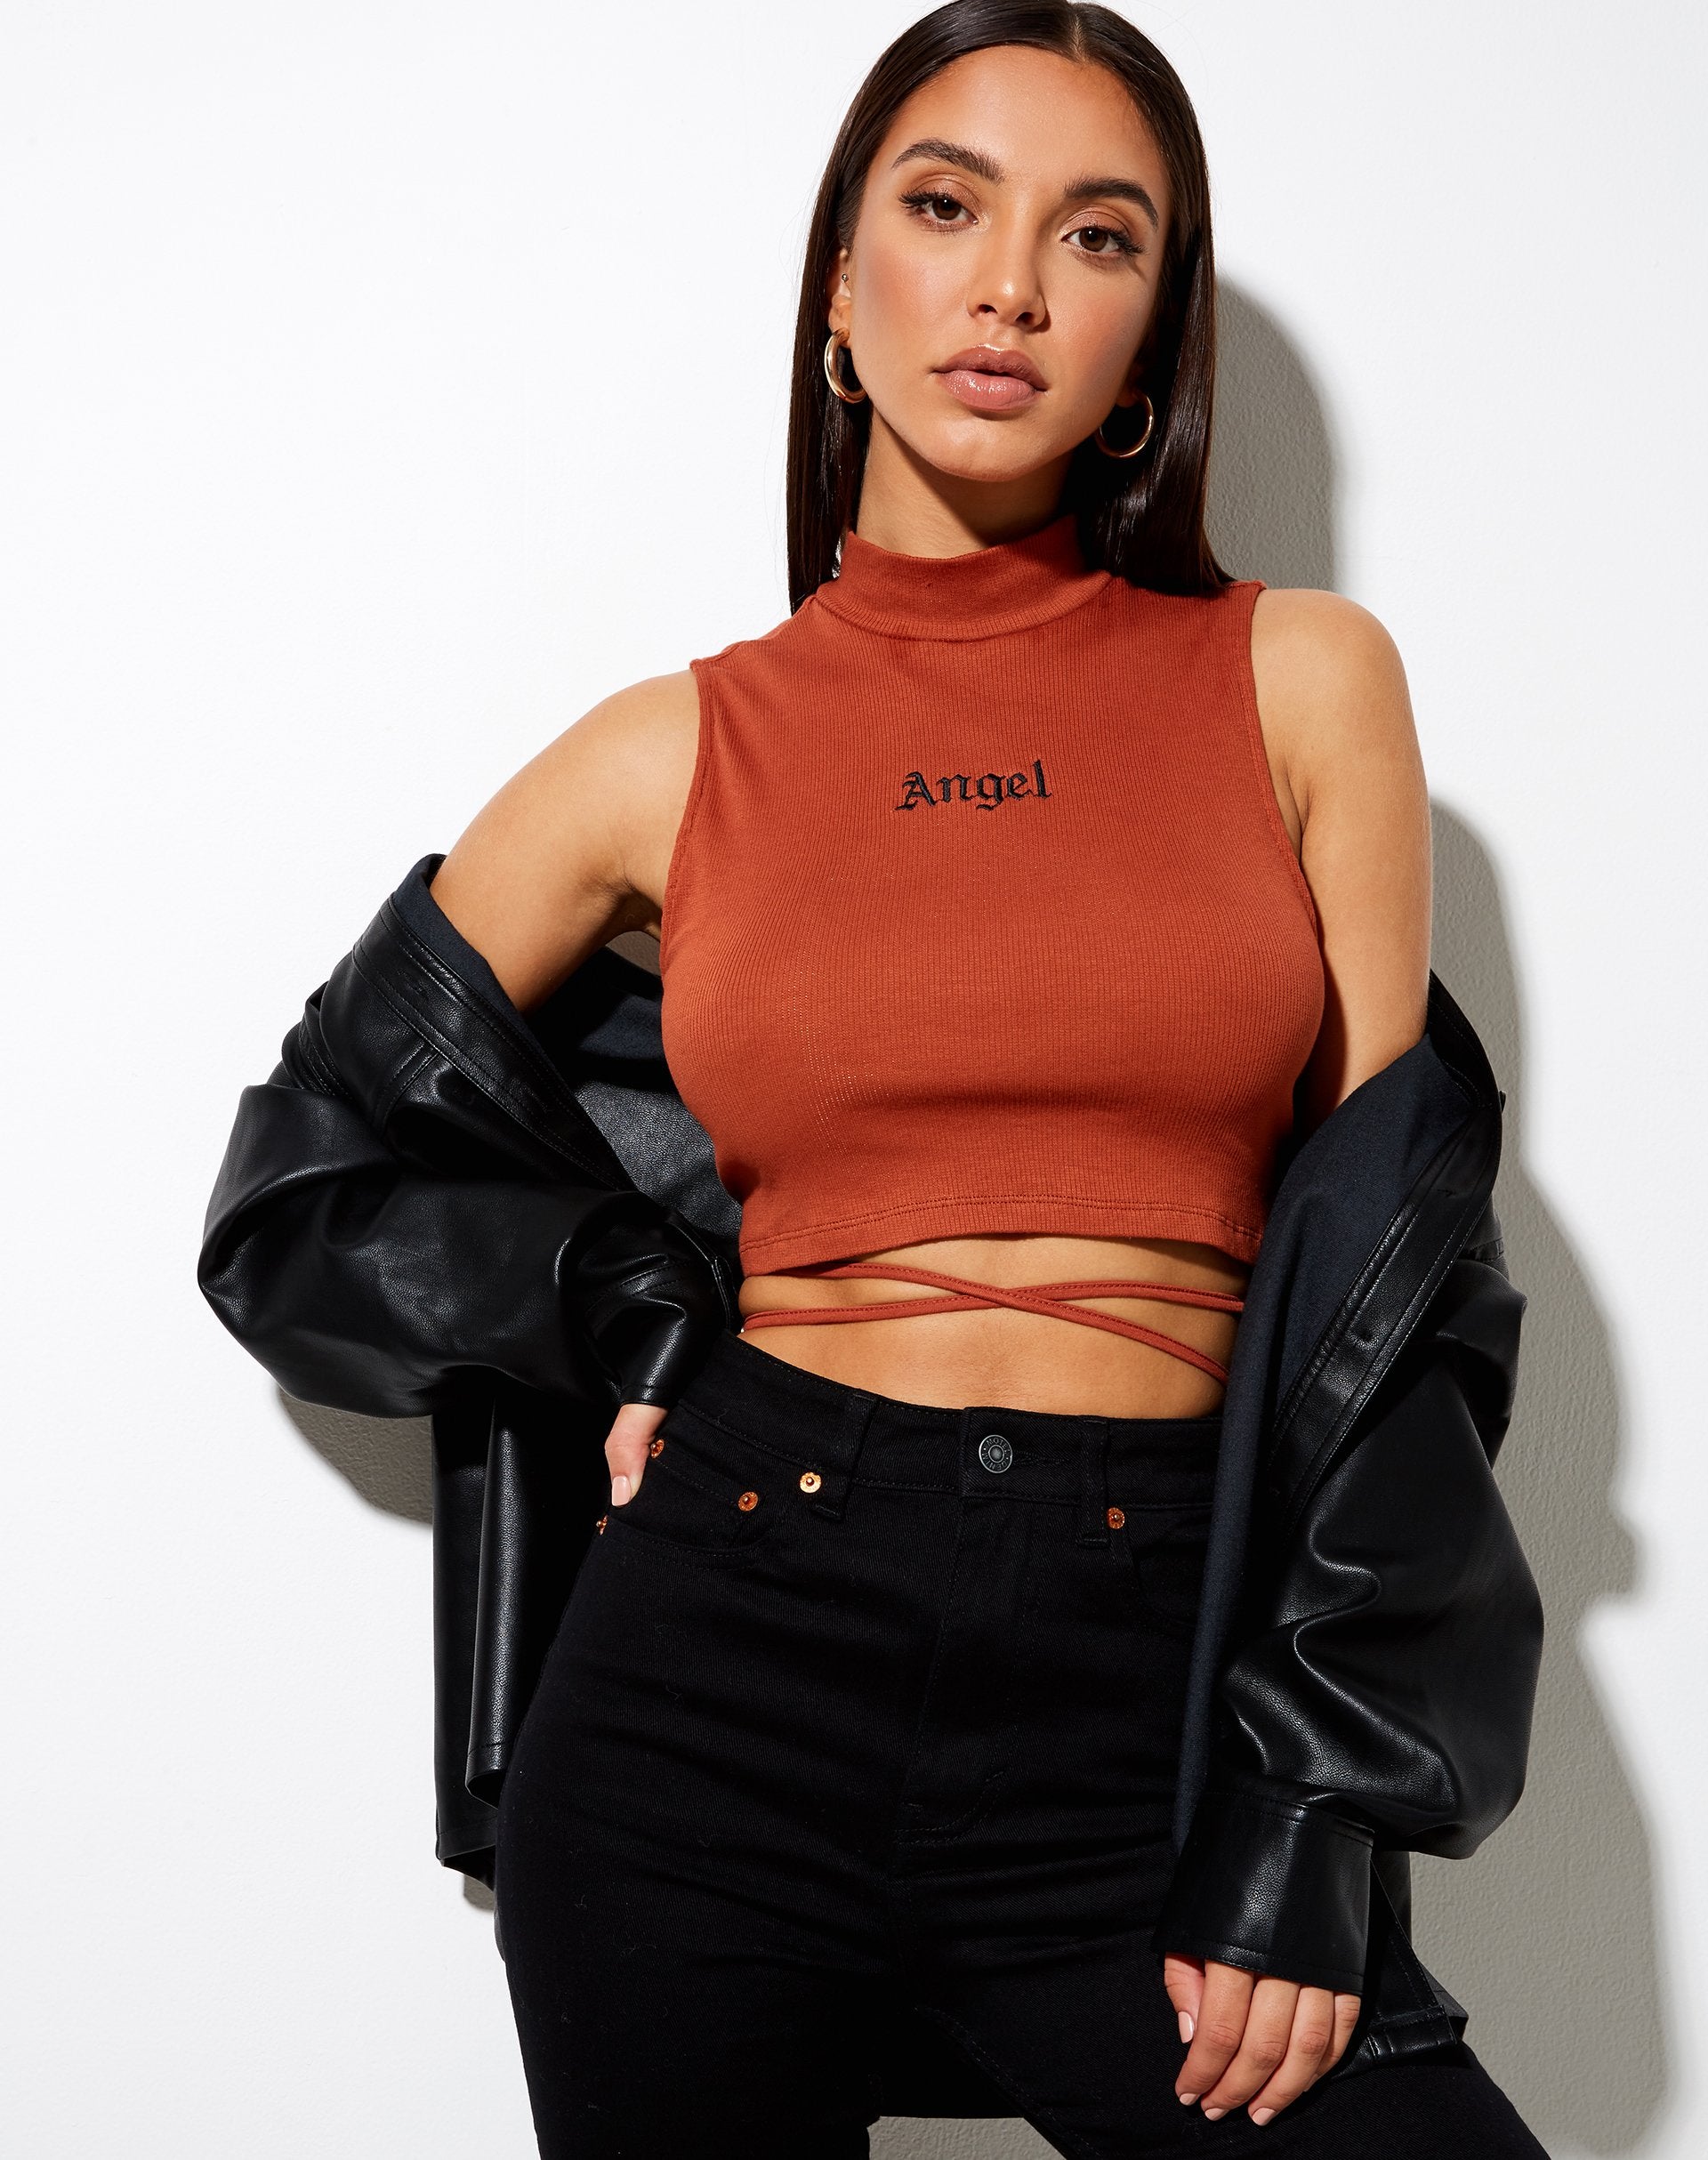 Image of Quera Crop Top in Rib Picante with Angel Embro